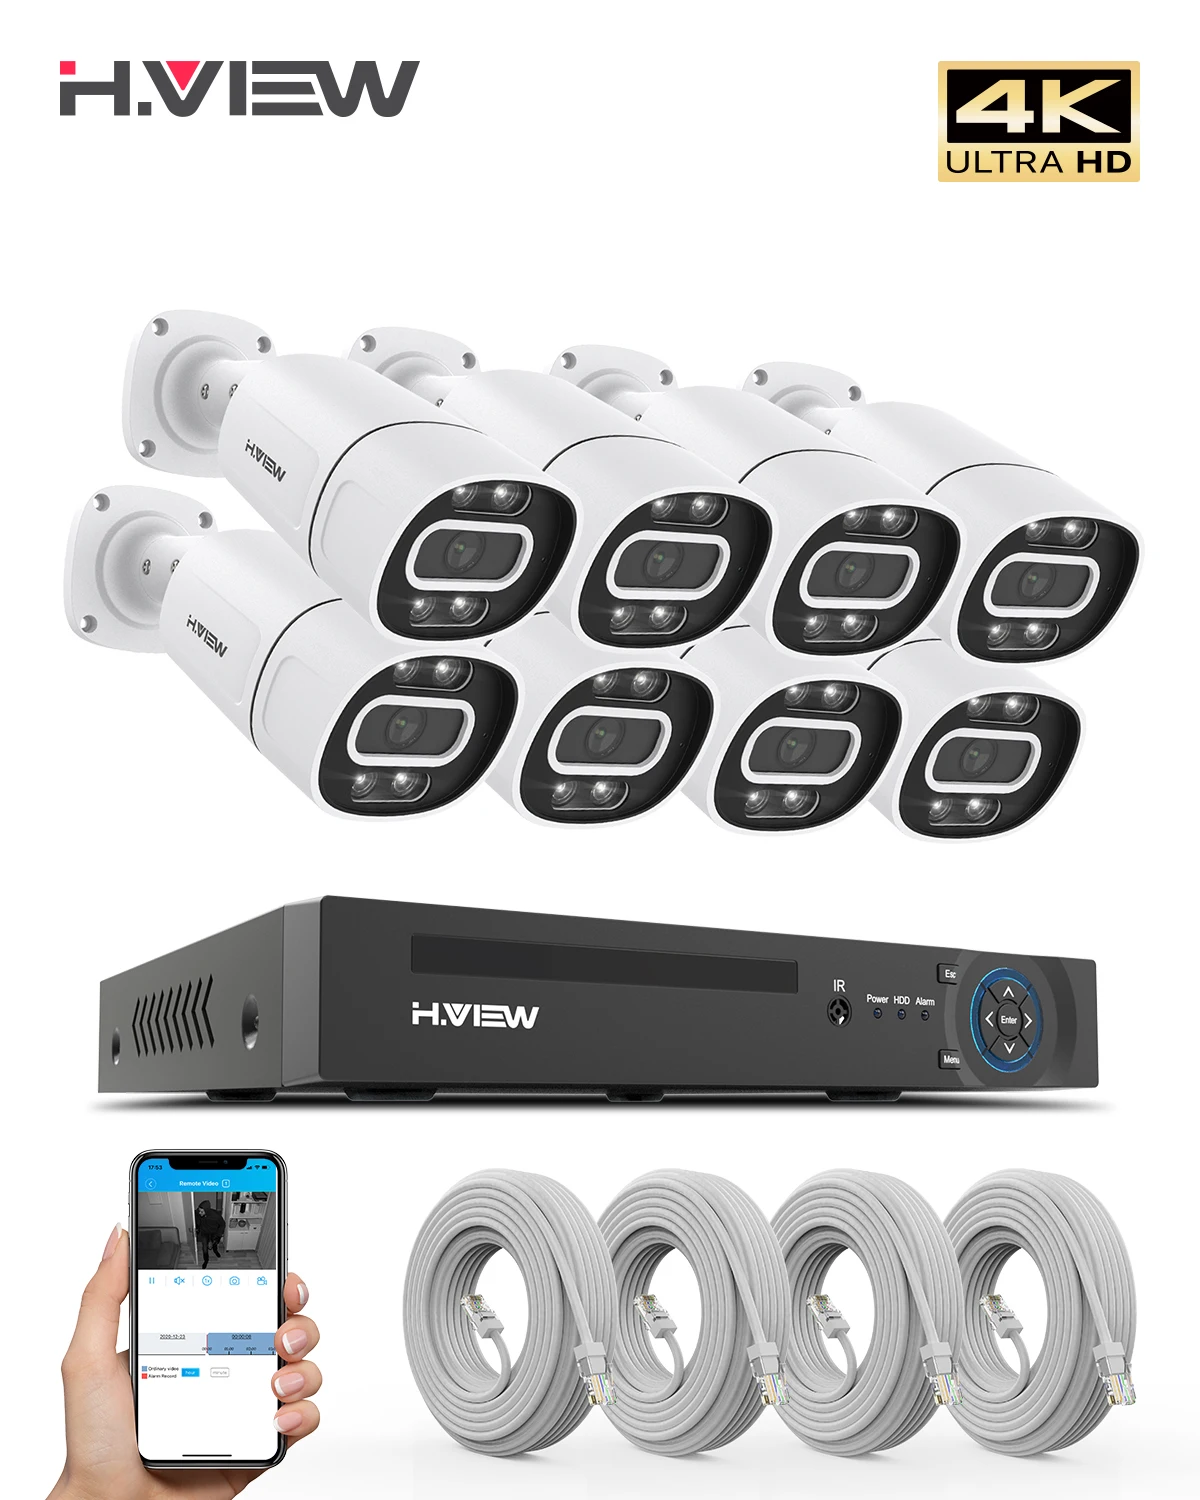 H.View Cctv Security Camera System Home Video Surveillanc 8Ch 4K 5Mp 8Mp Kit Ai Audio Outdoor Ip secur Camera Poe xmeye app Nvr